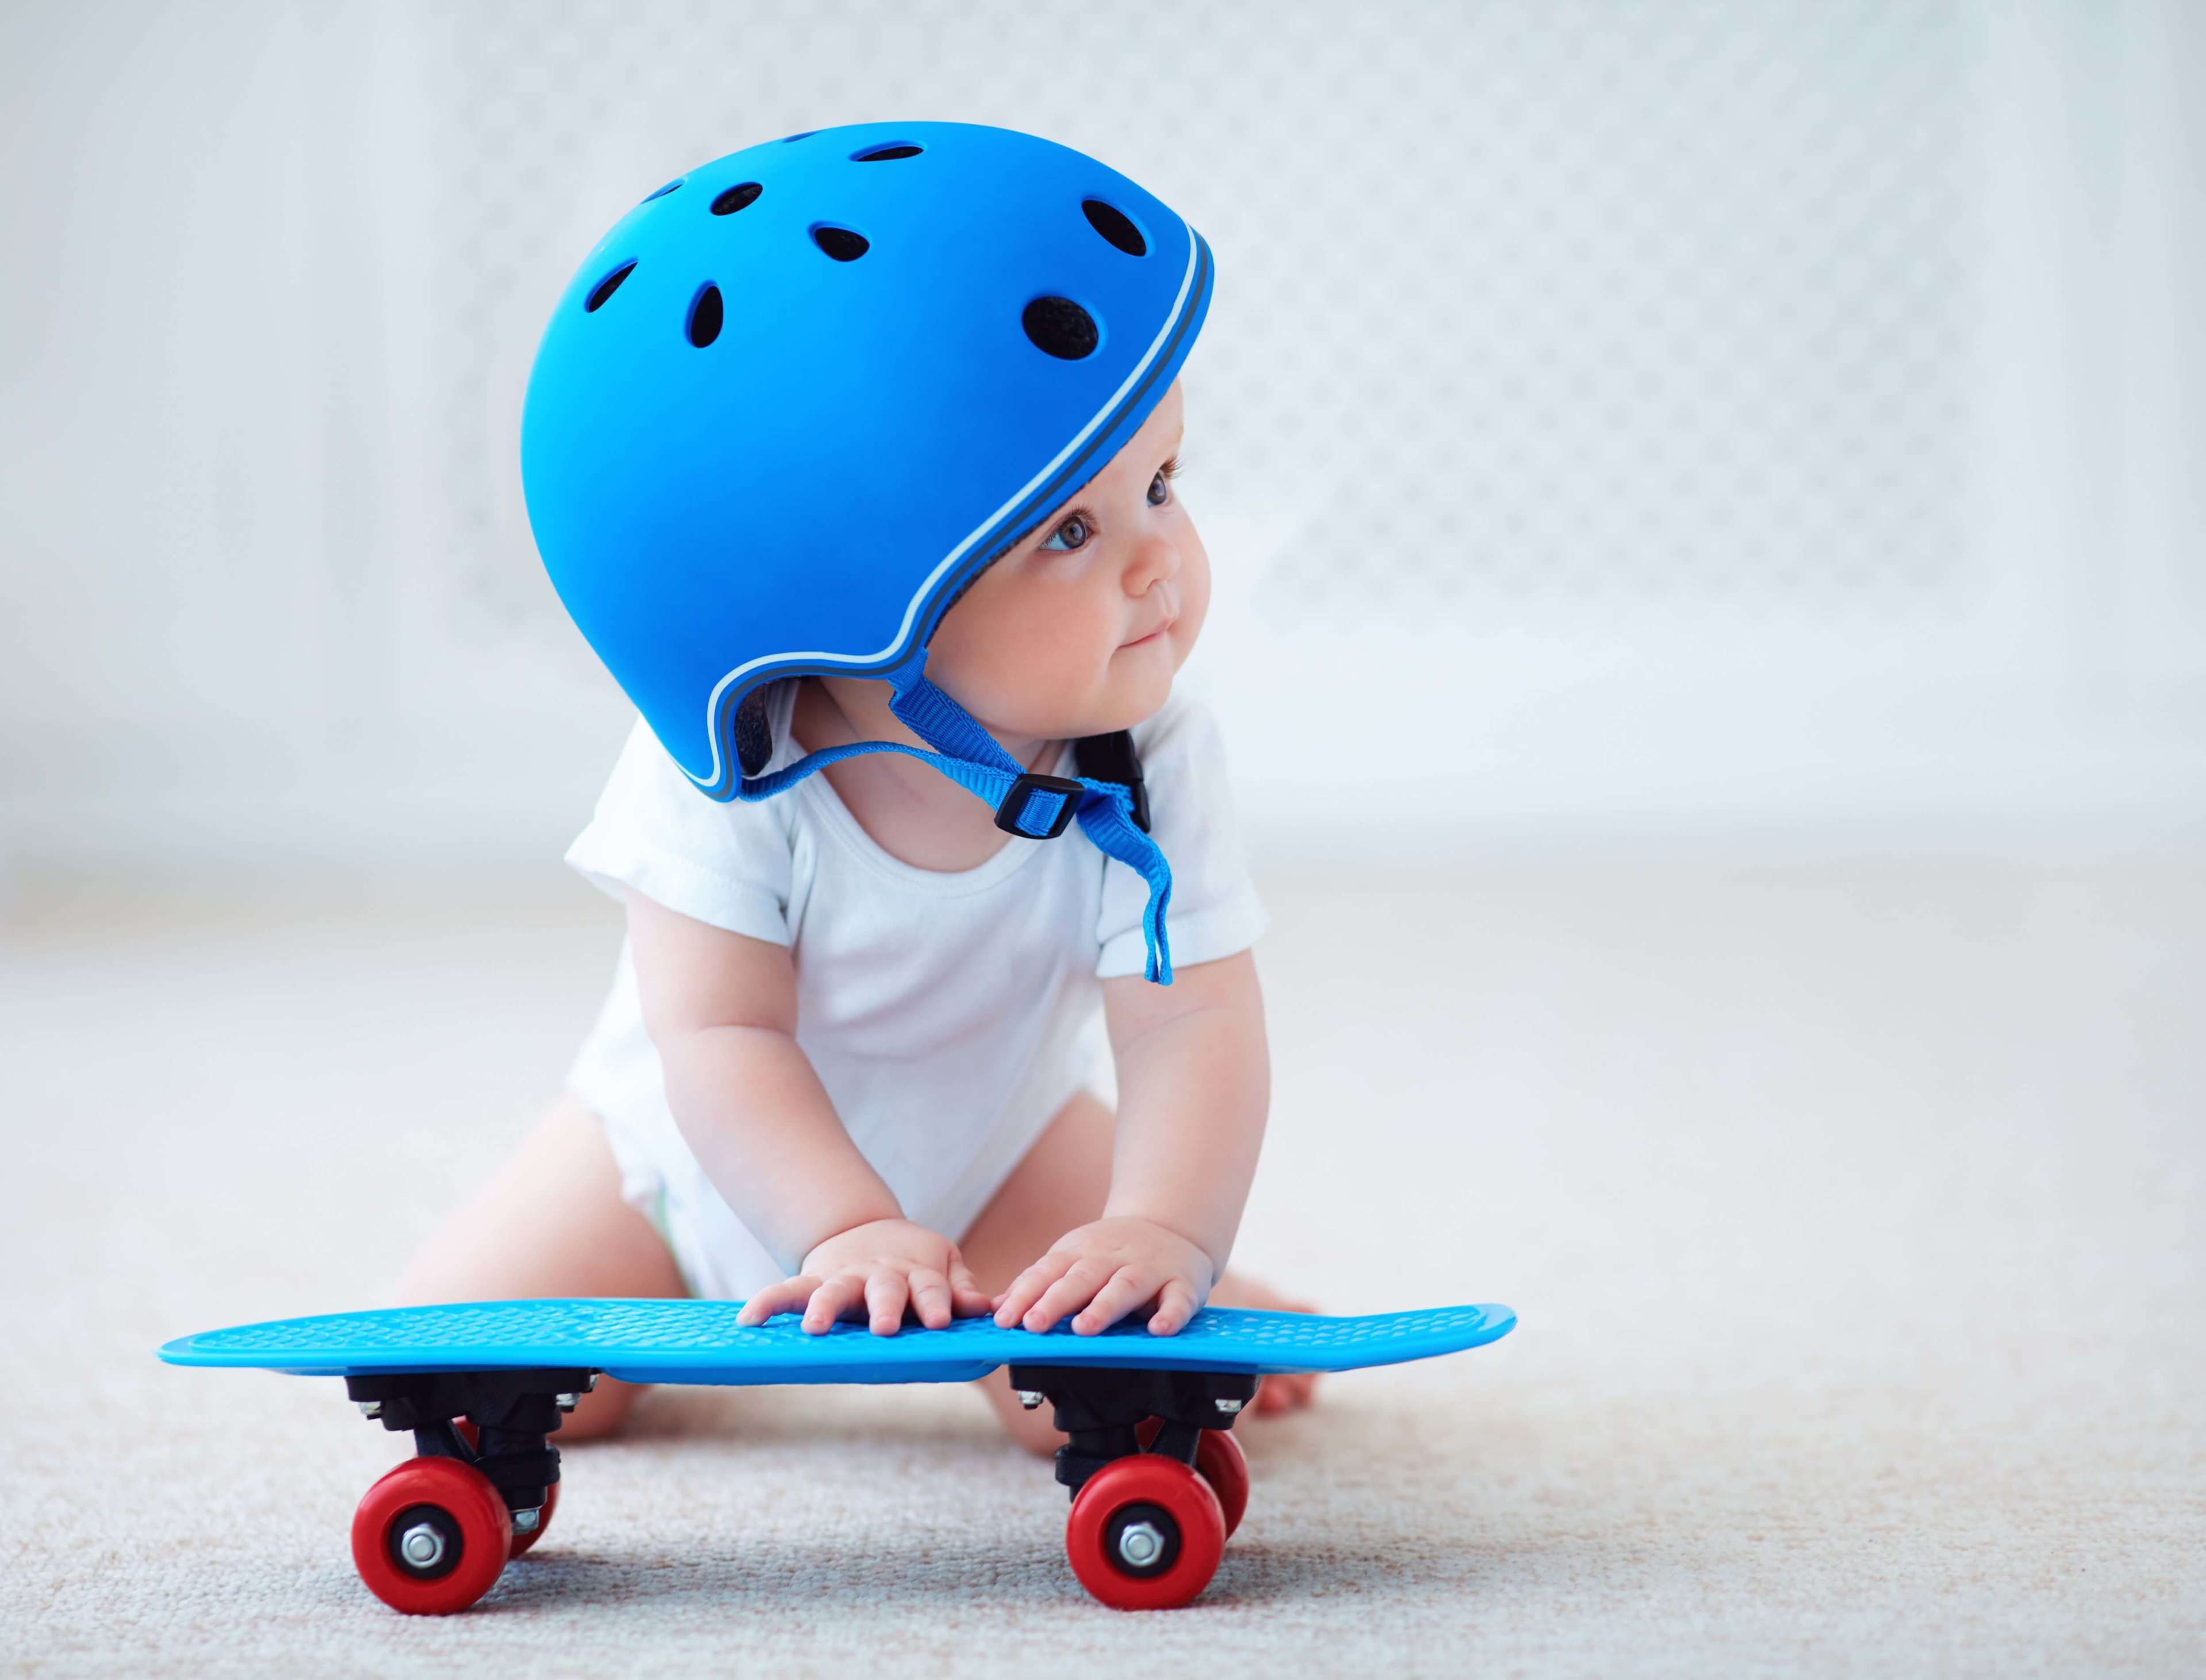 Cute infant baby girl in protective helmet outfit ready to ride skateboard